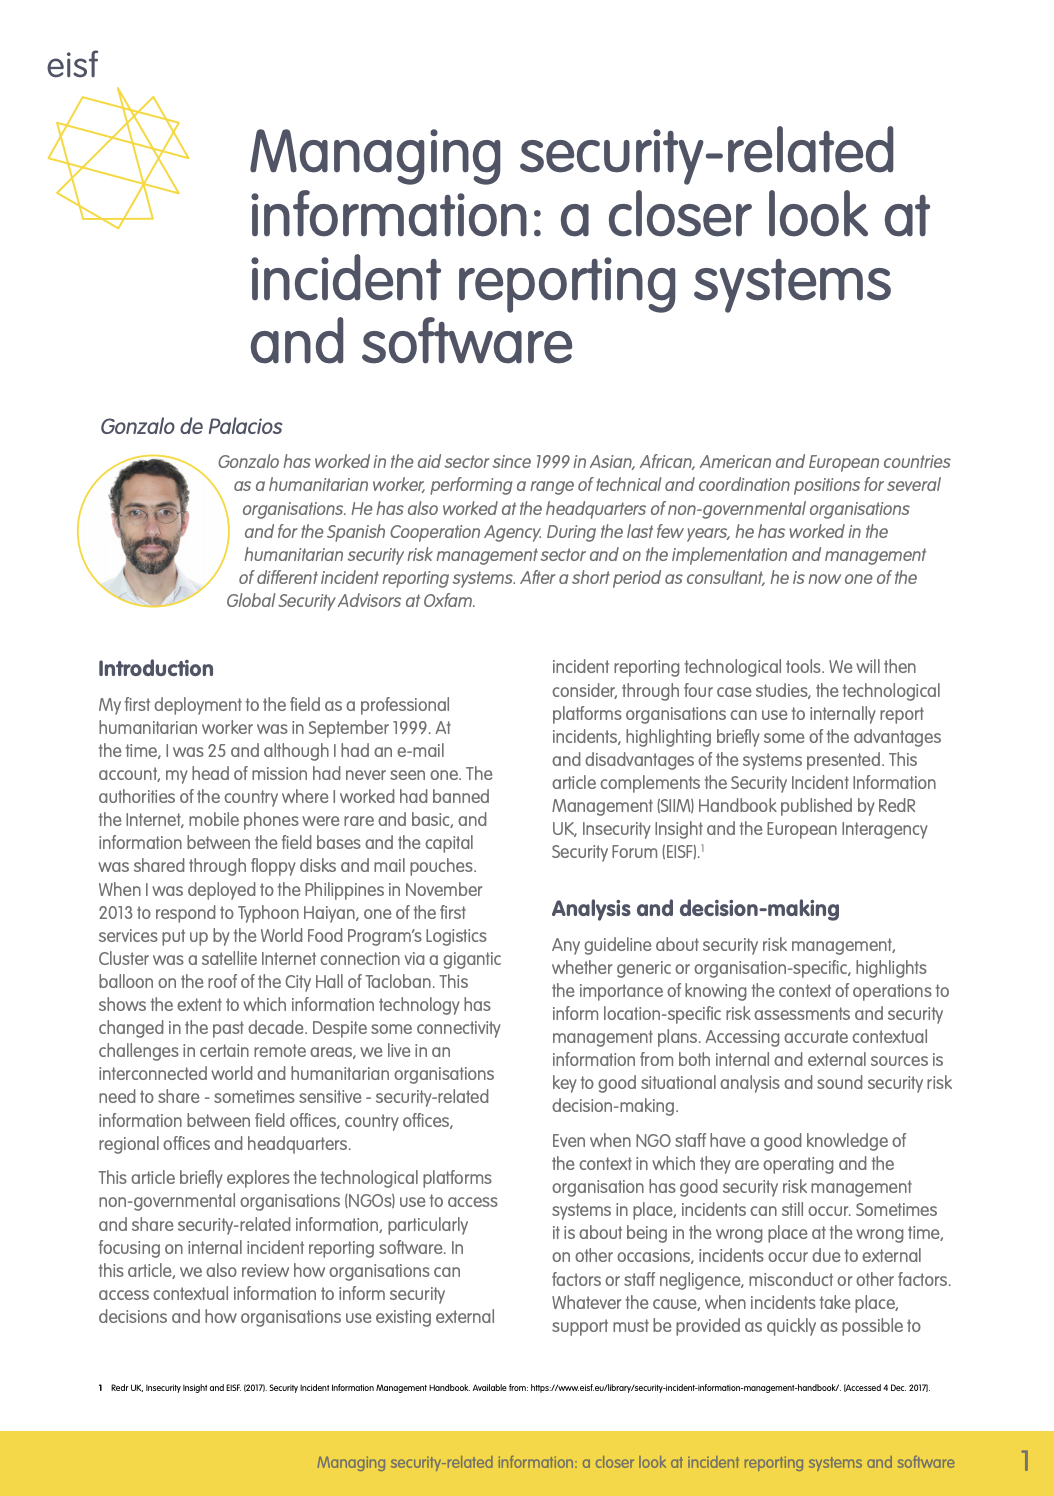 Managing security-related information: a closer look at incident reporting systems and software